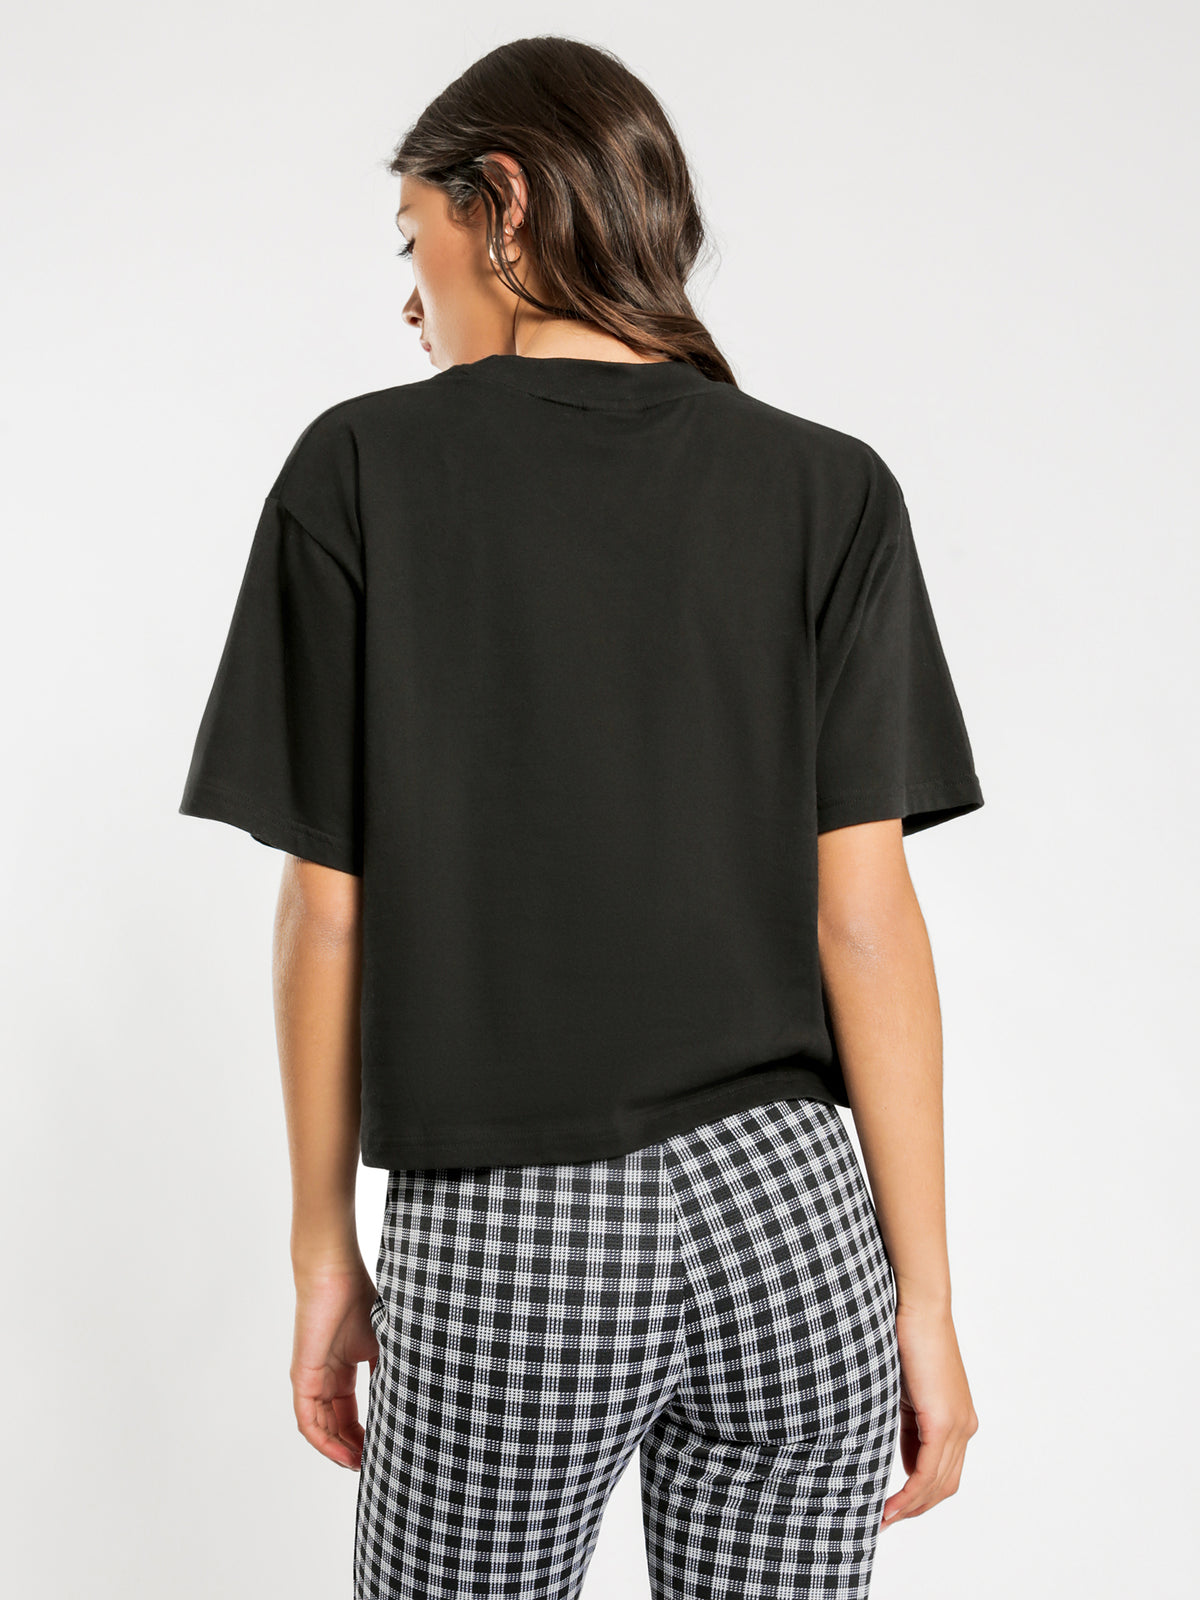 Holt Boxy T-Shirt in Black